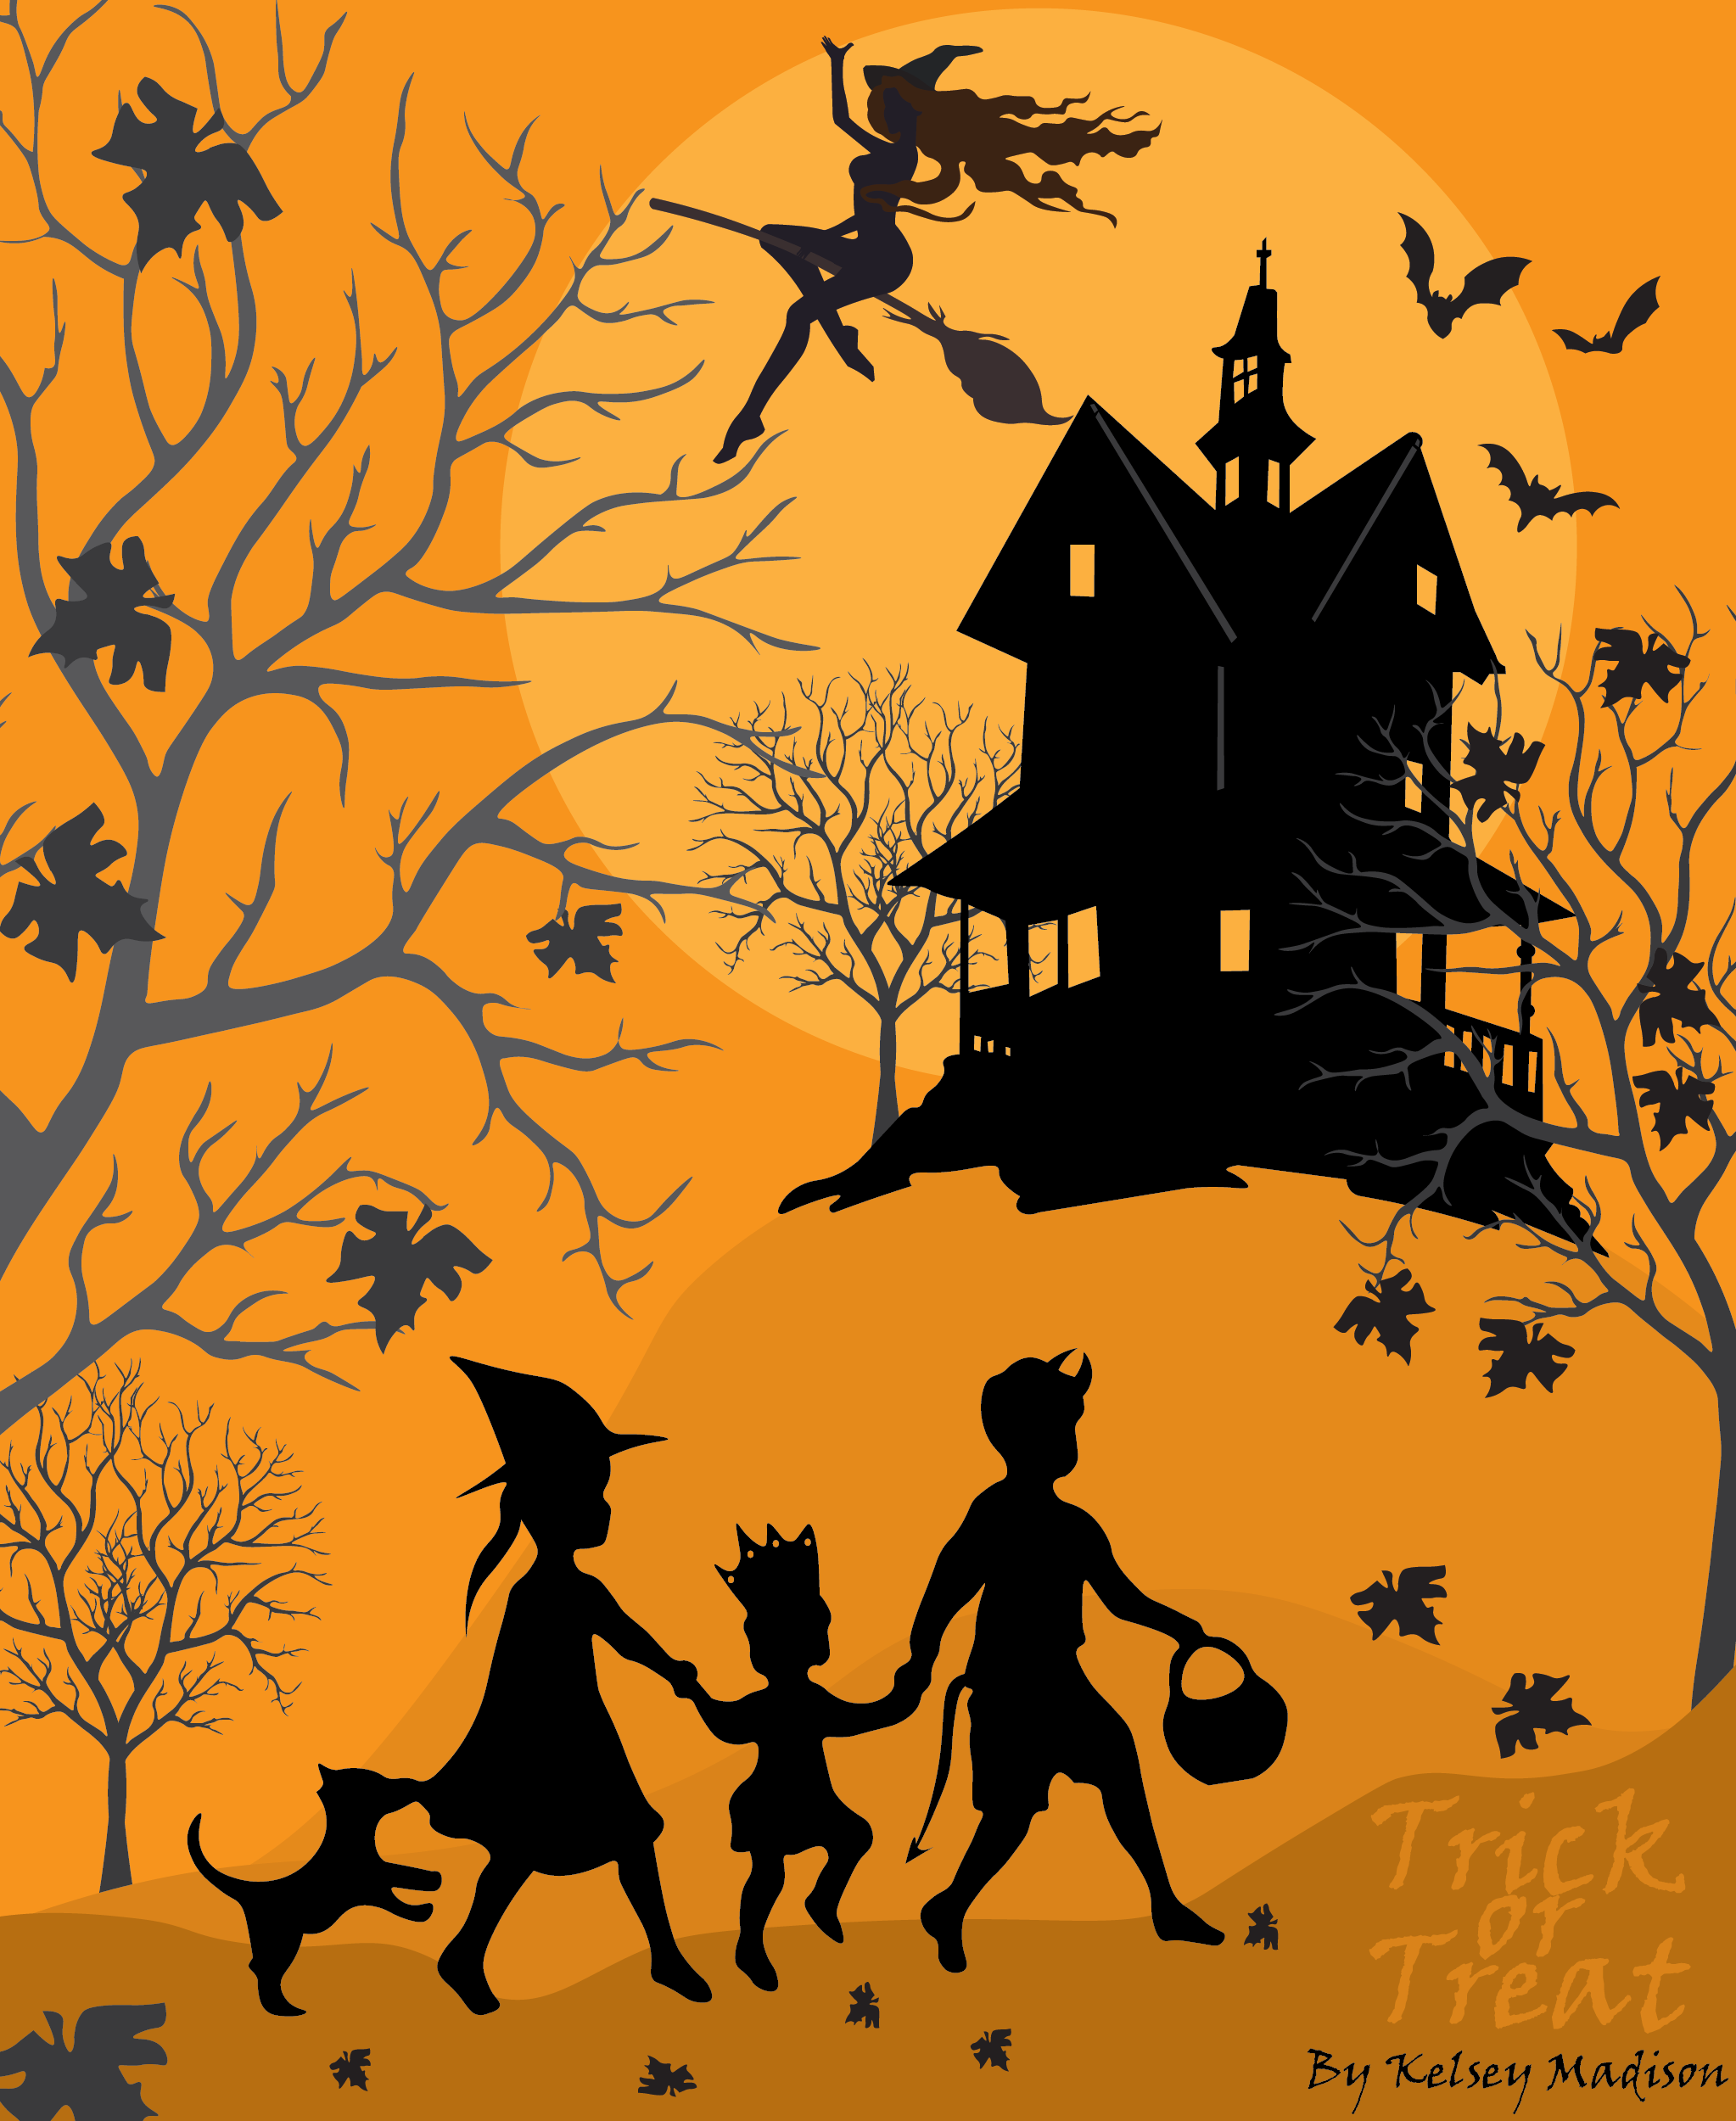 Trick or treat graphic of kids walking in front of haunted mansion on hill